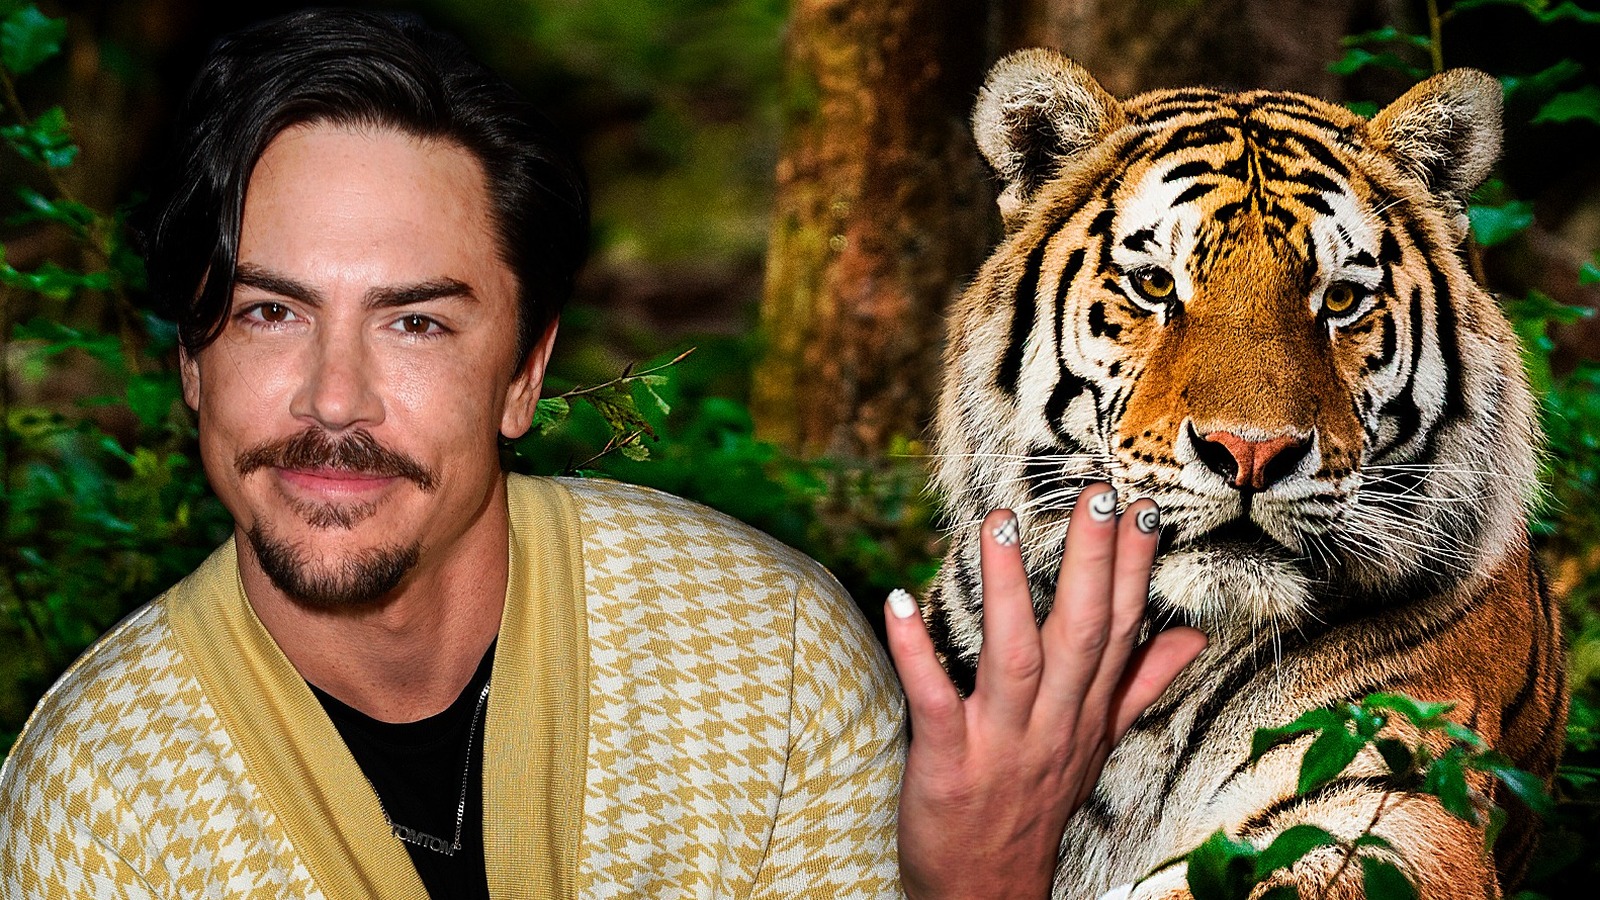 Do not support': Lala Kent slams Tom Sandoval over 'animal cruelty' as 'Vanderpump  Rules' star poses with captive tiger - MEAWW